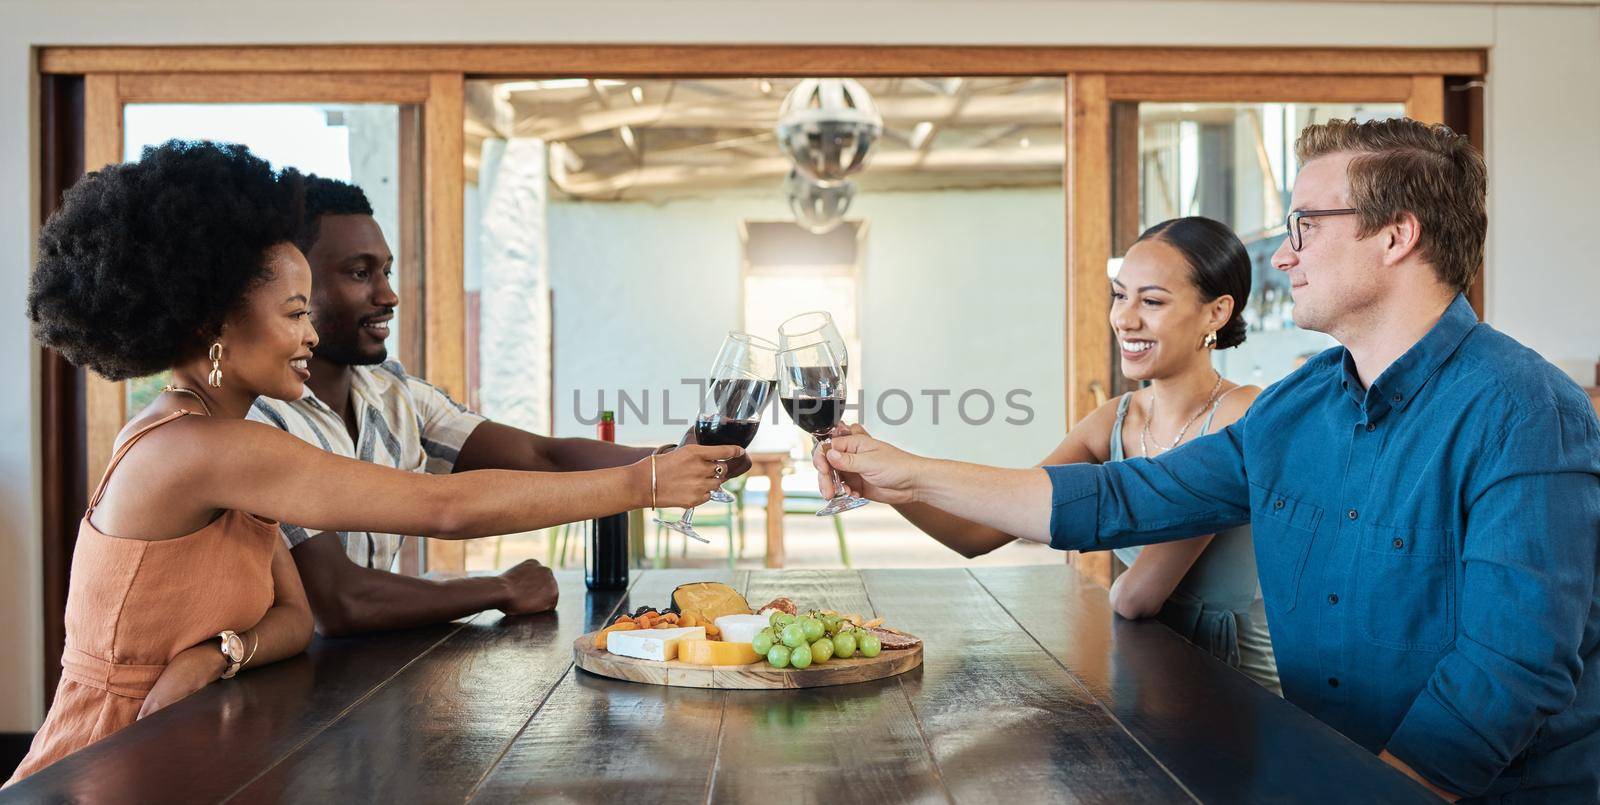 Double date of couples having dinner together and drinking wine at a restaurant celebrating and having fun. Romantic group of friends enjoying a lunch date in celebration of their love.